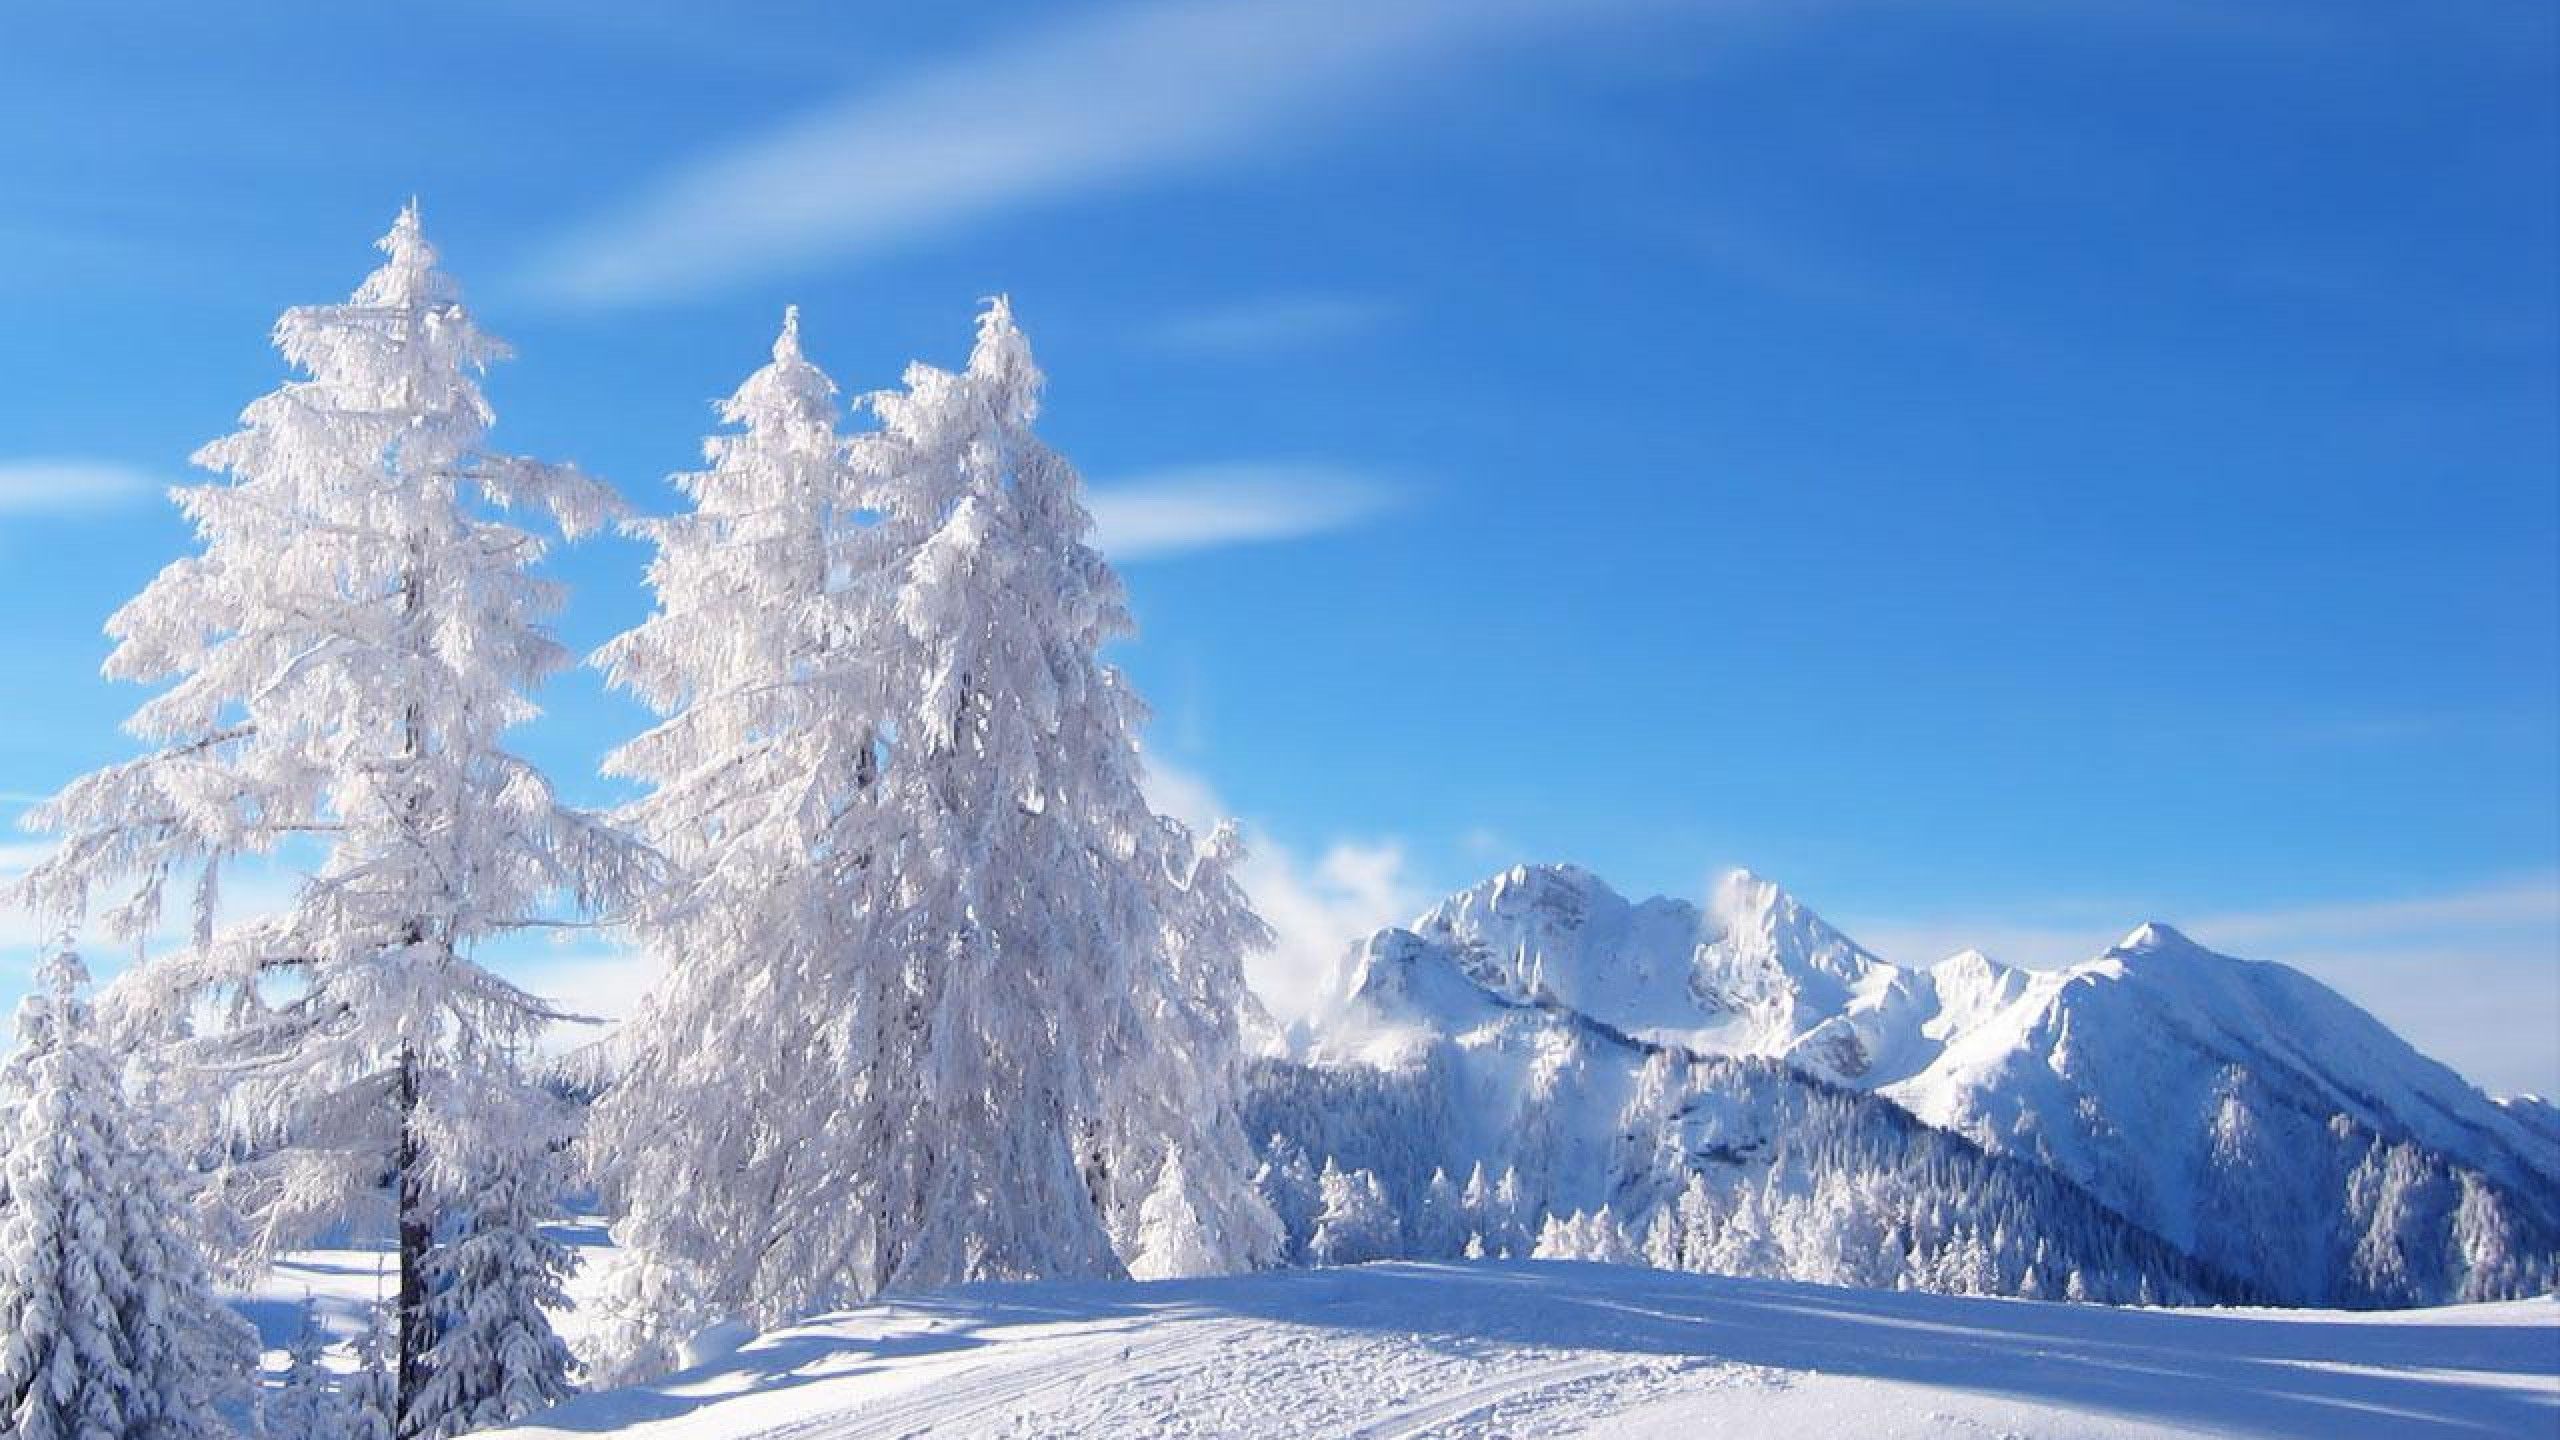 Winter HD Backgrounds Free download 